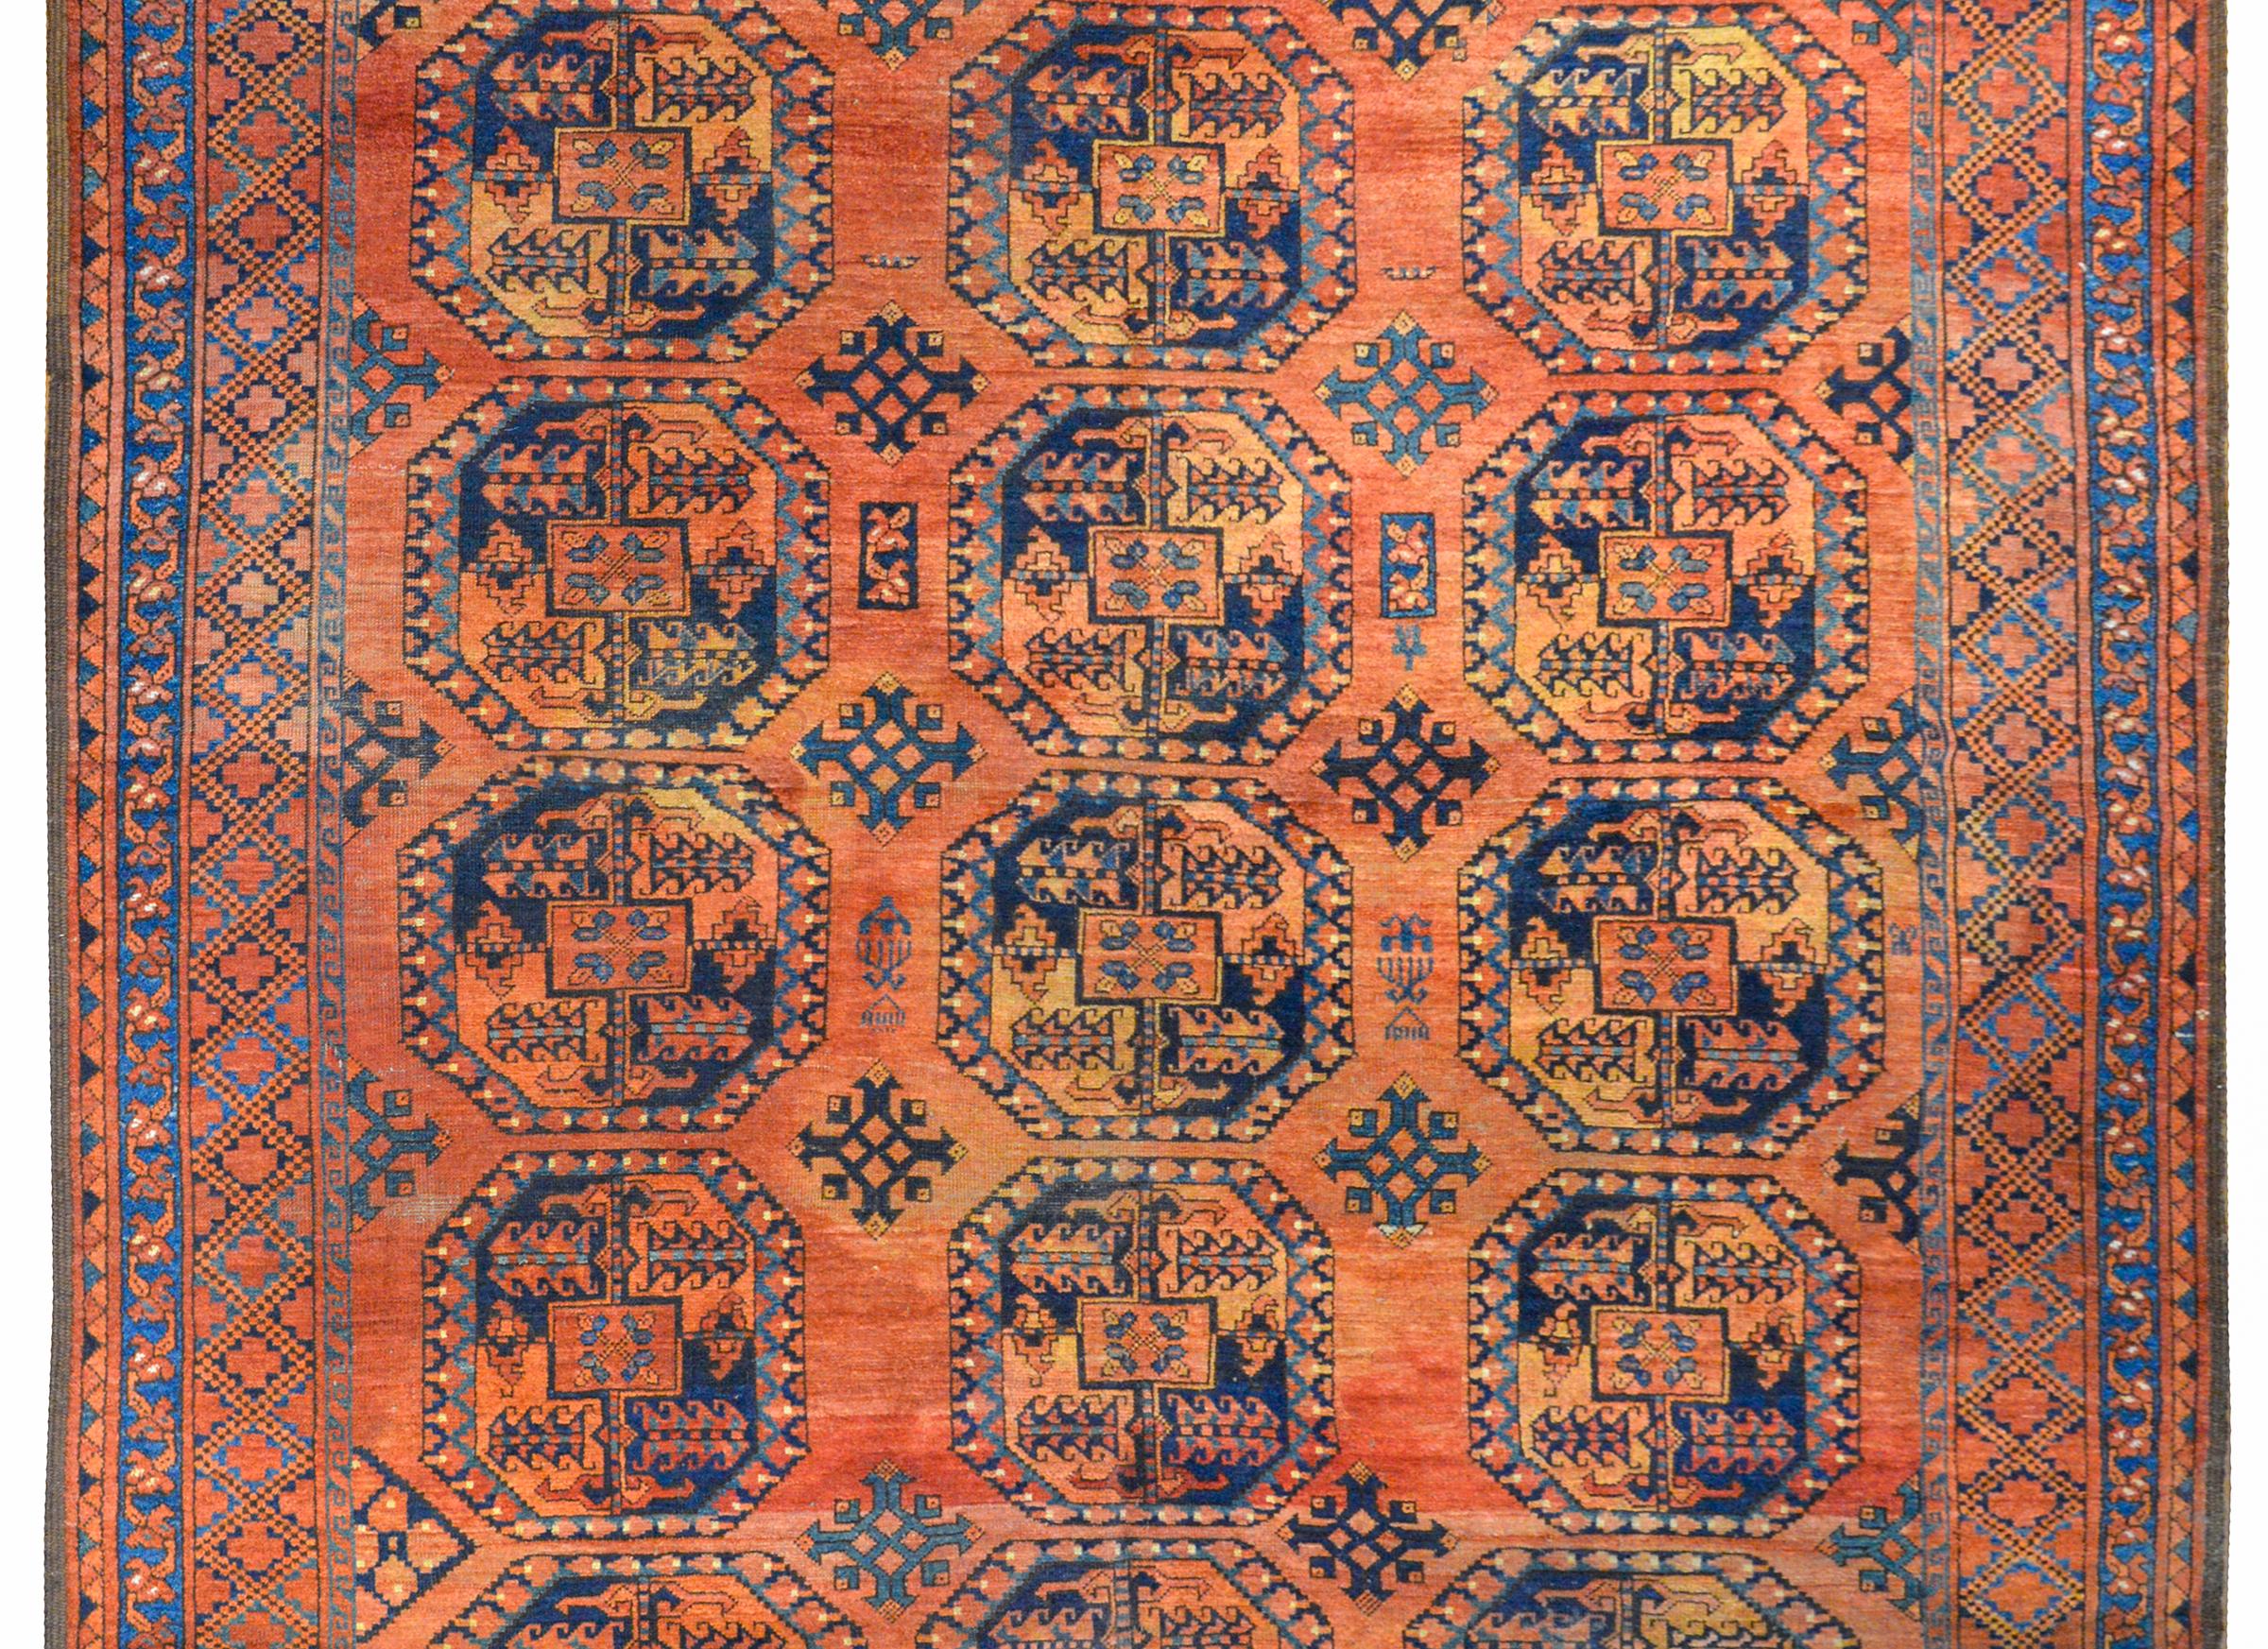 A beautiful early 20th century Afghani Ersari rug with an all-over patter of crimson and indigo medallions each woven with a stylized floral pattern and set against a fantastic abrash crimson background. The border is wonderful with multiple